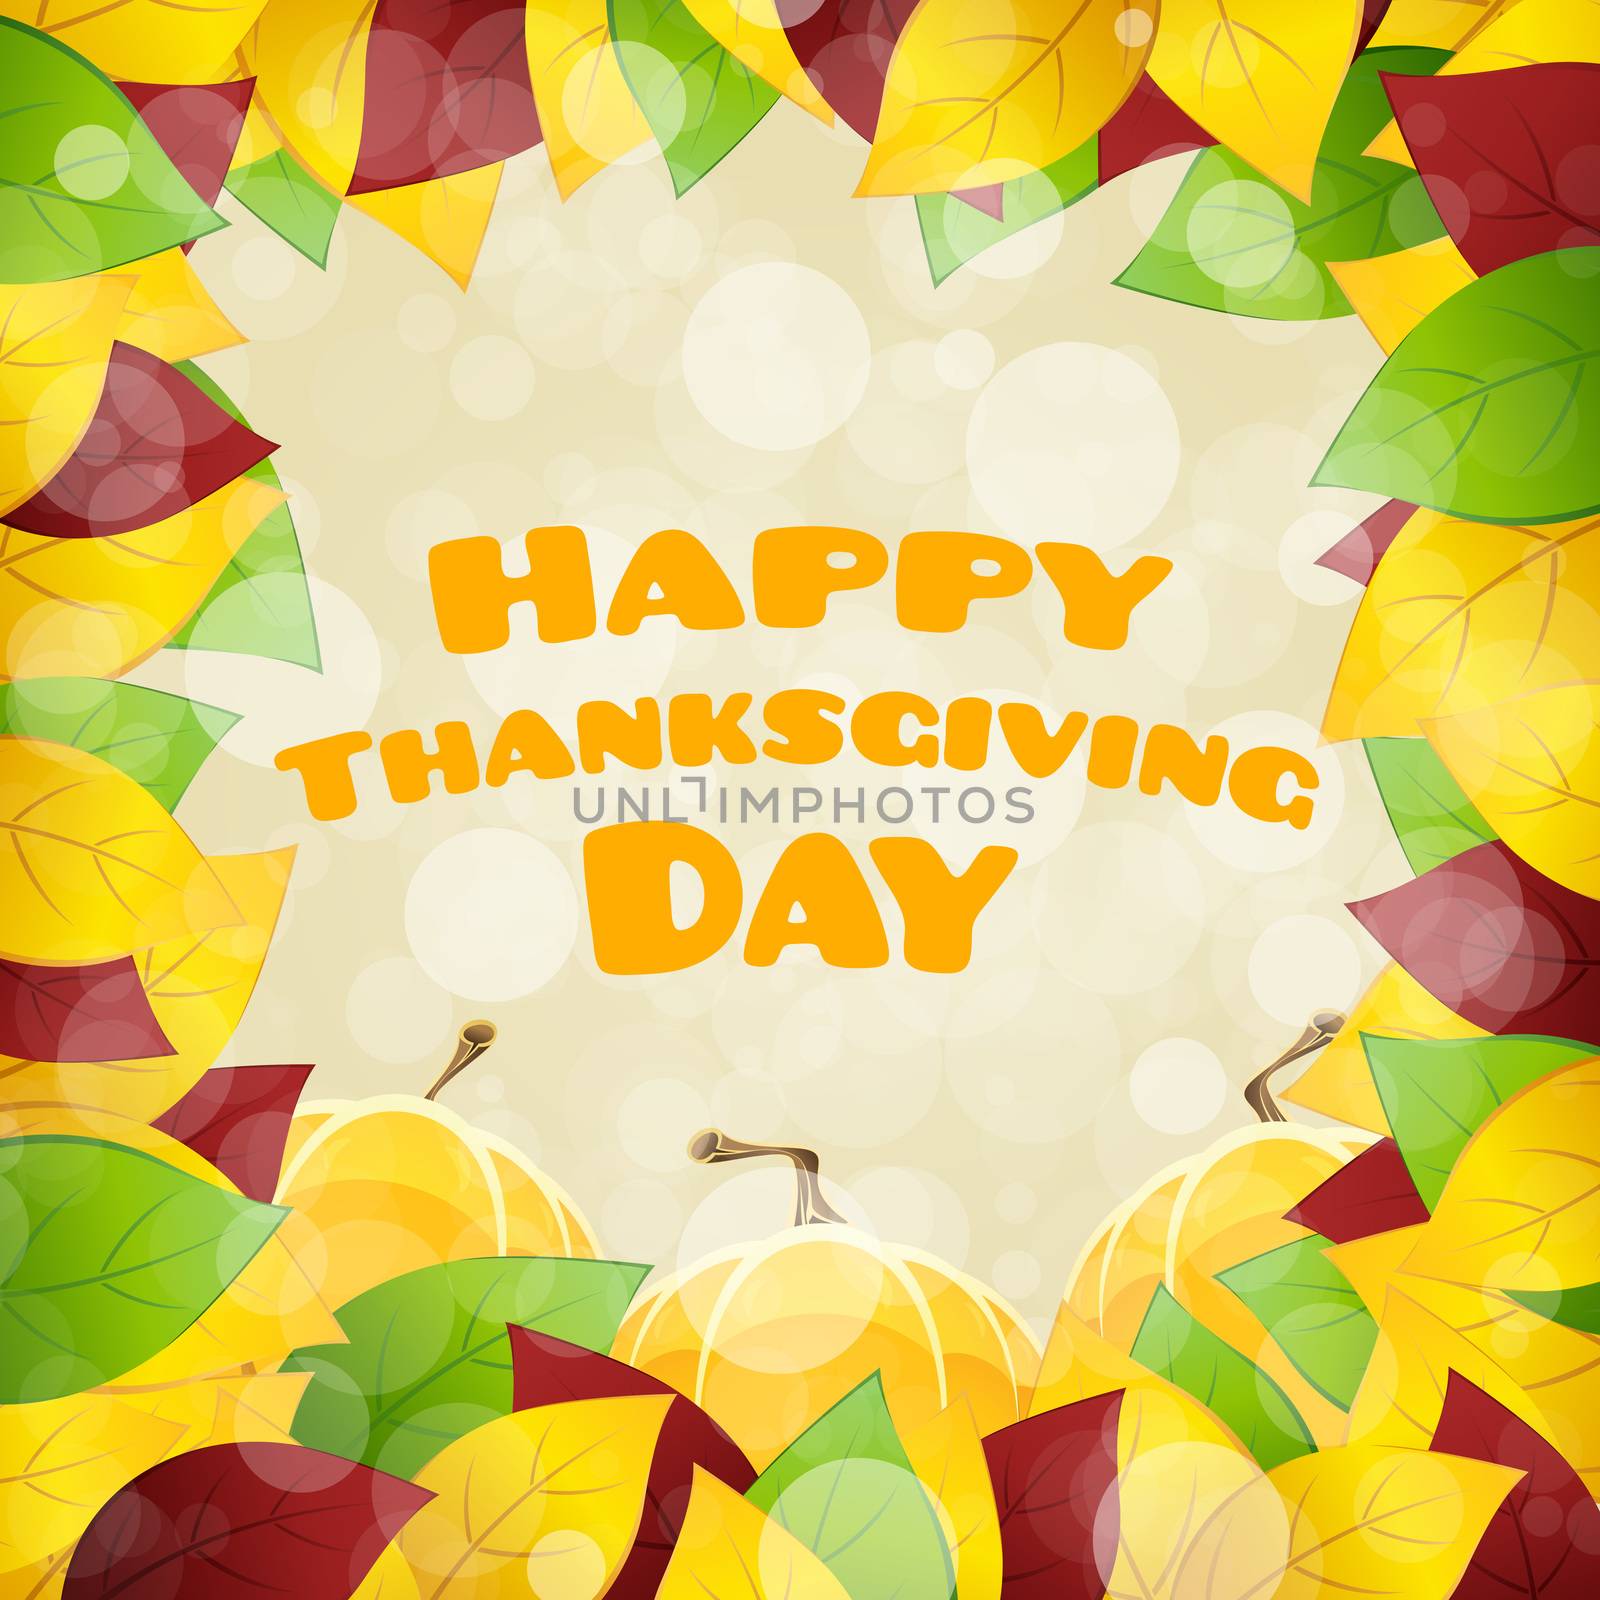 Happy Thanksgiving Day card with Leaves and Pumpkins